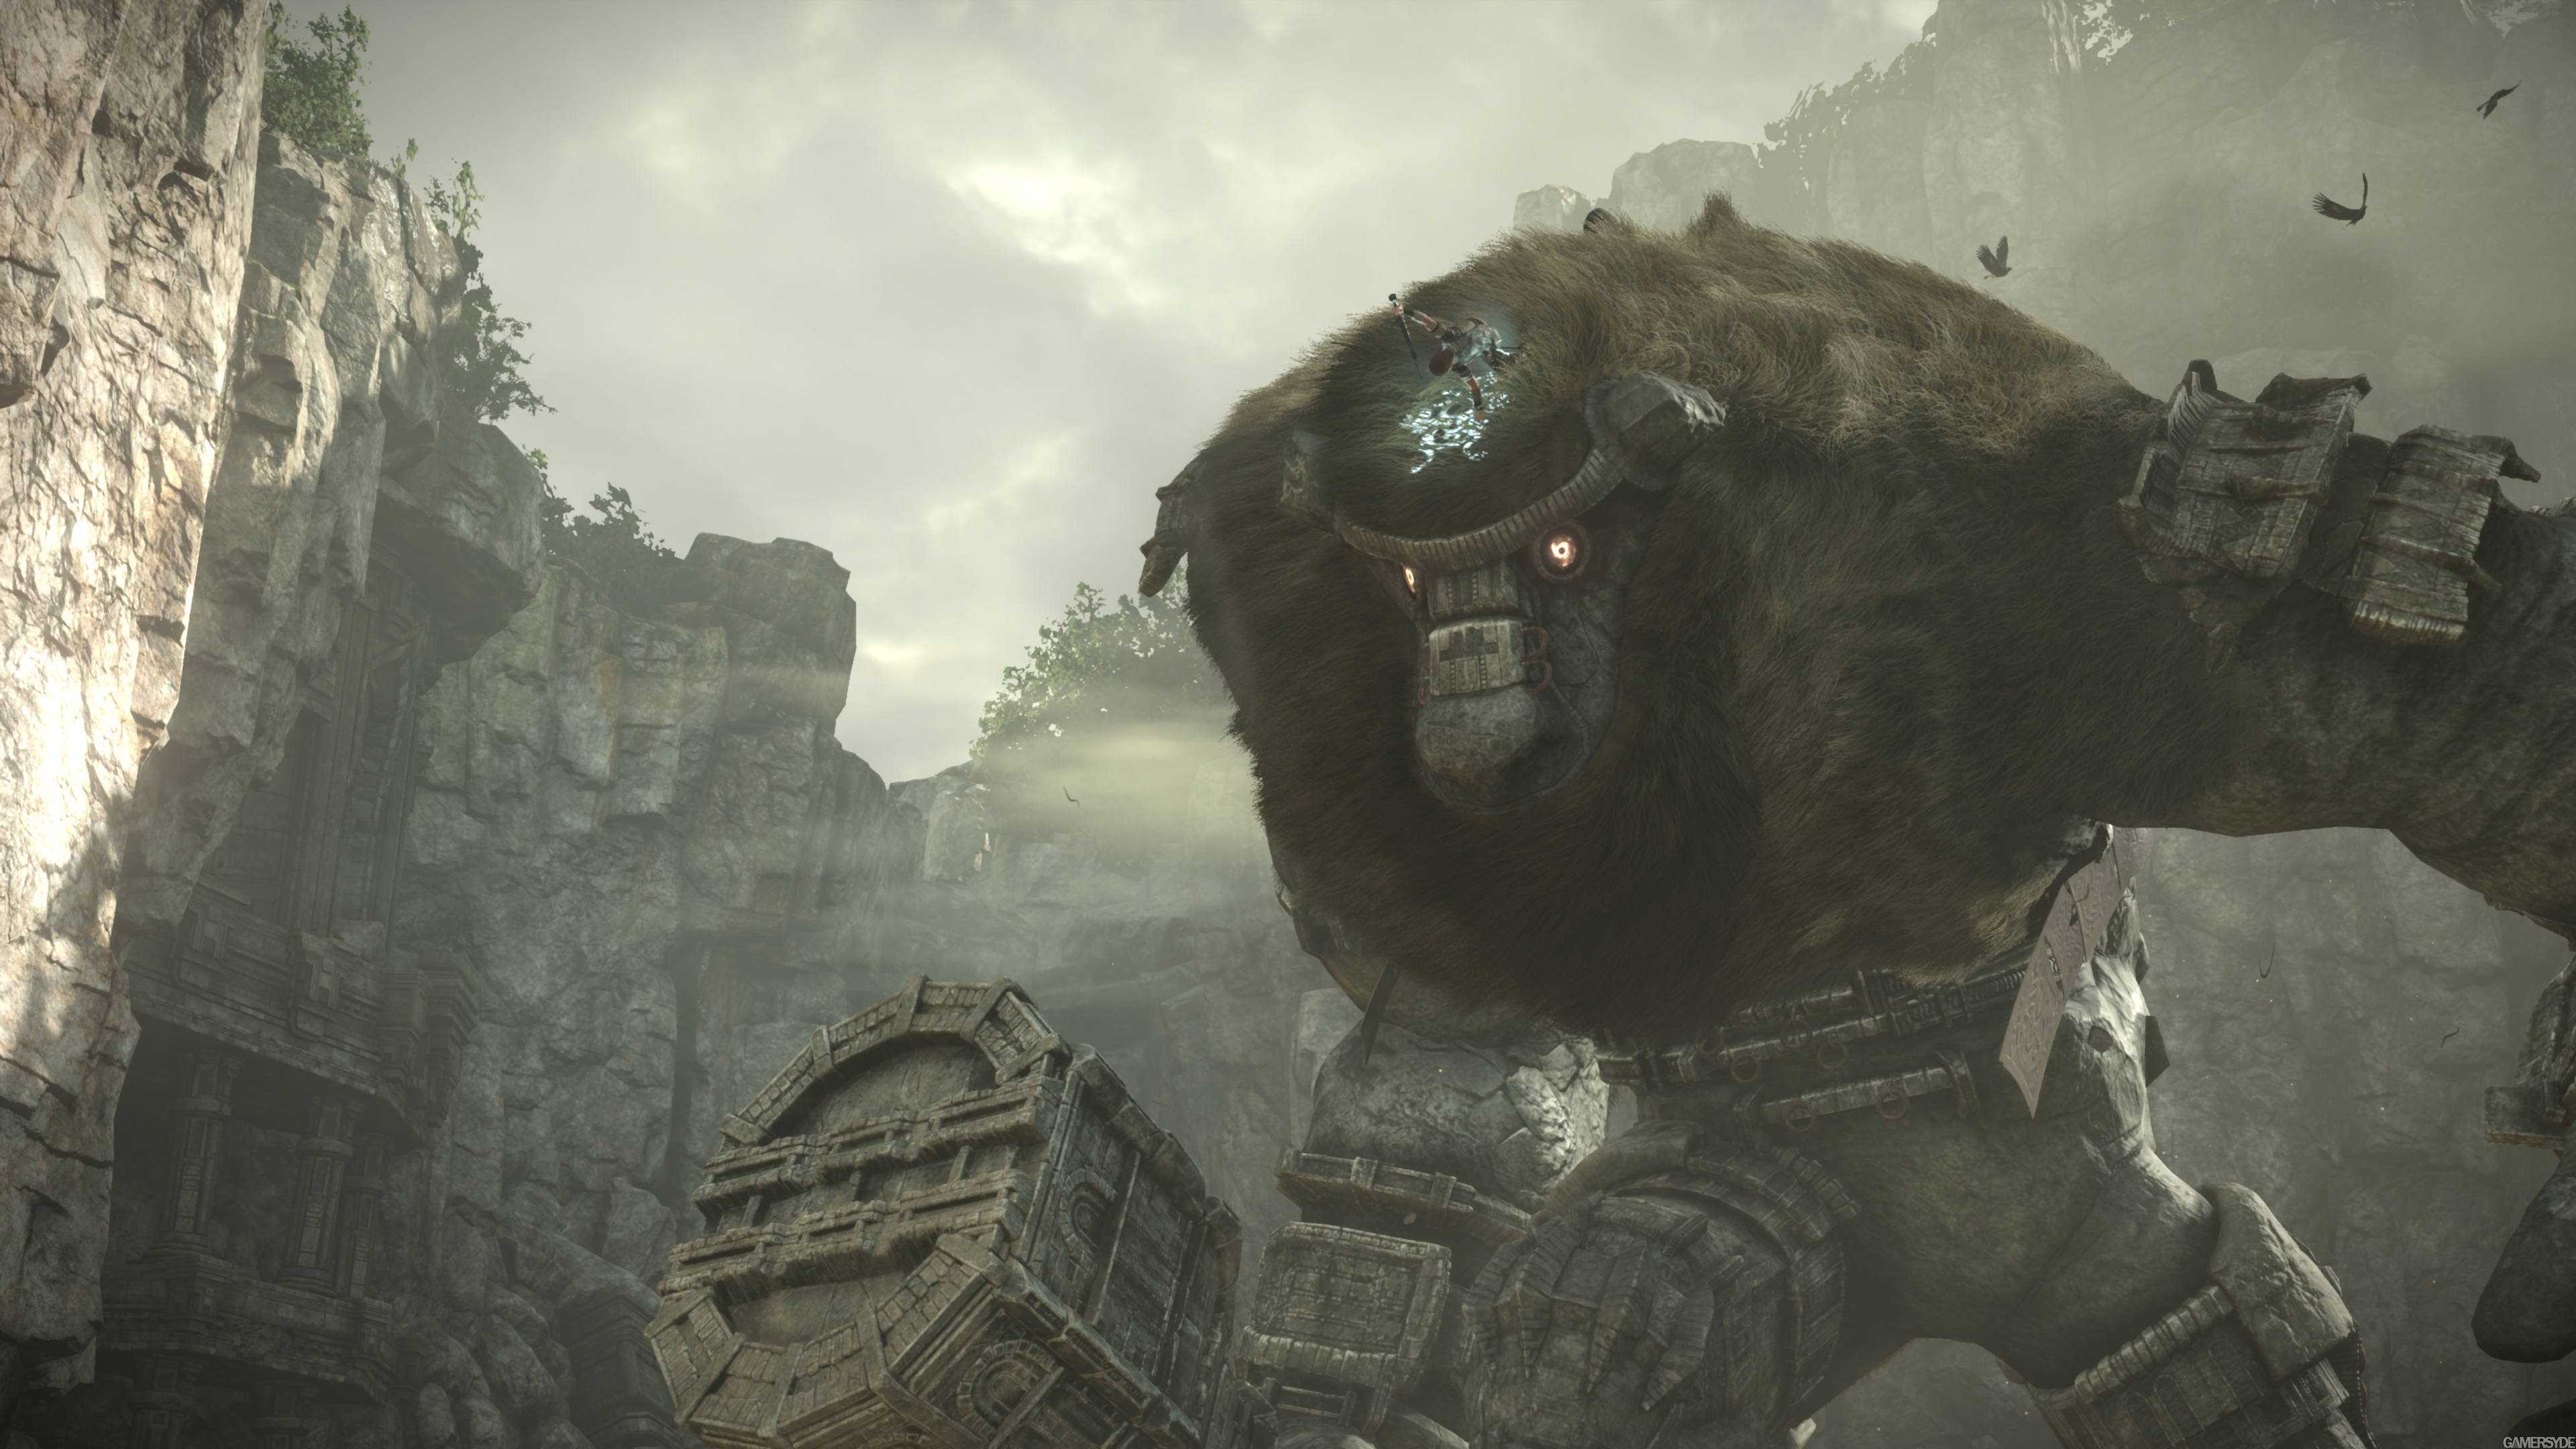 image_shadow_of_the_colossus-35814-910_0001.jpg